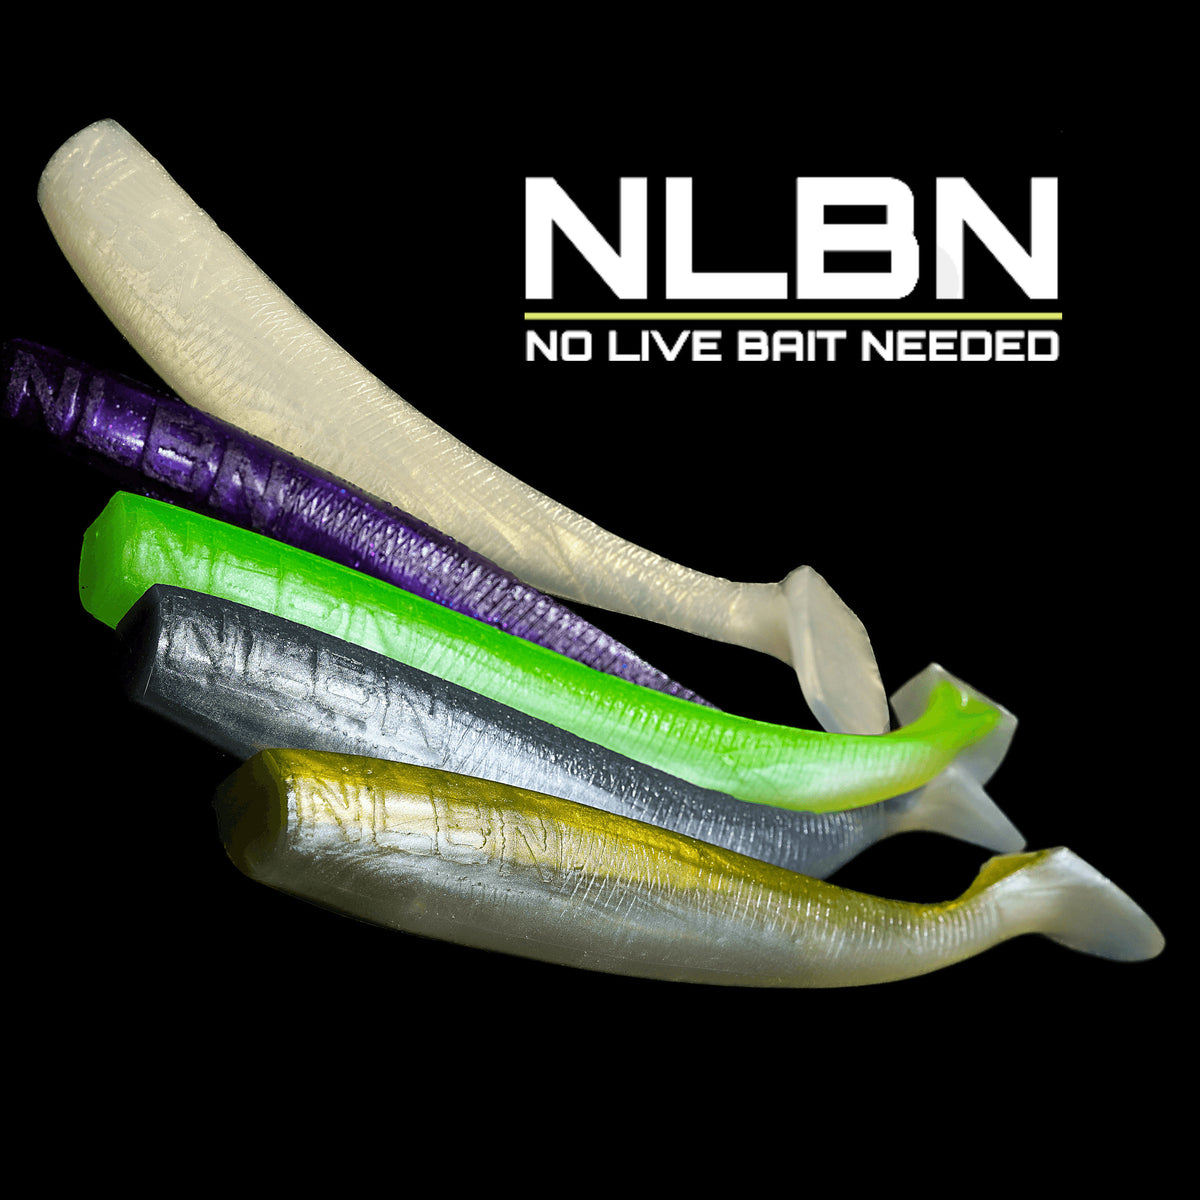 No Live Bait Needed - 8” Swimbait - Reel Deal Tackle